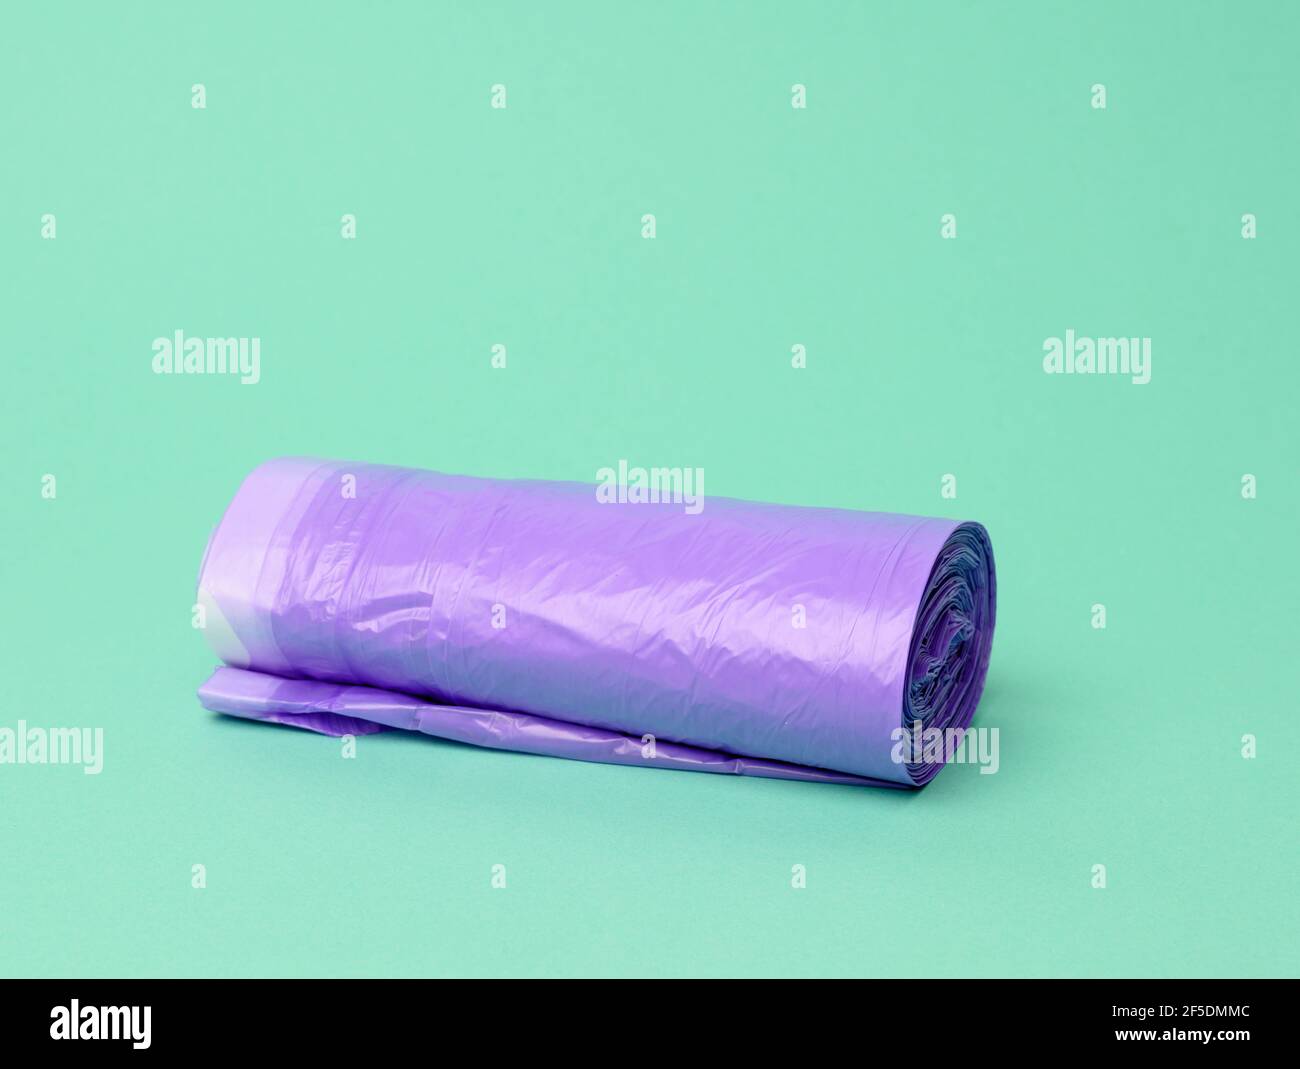 https://c8.alamy.com/comp/2F5DMMC/skein-of-purple-plastic-trash-bags-with-strings-on-a-green-background-close-up-2F5DMMC.jpg